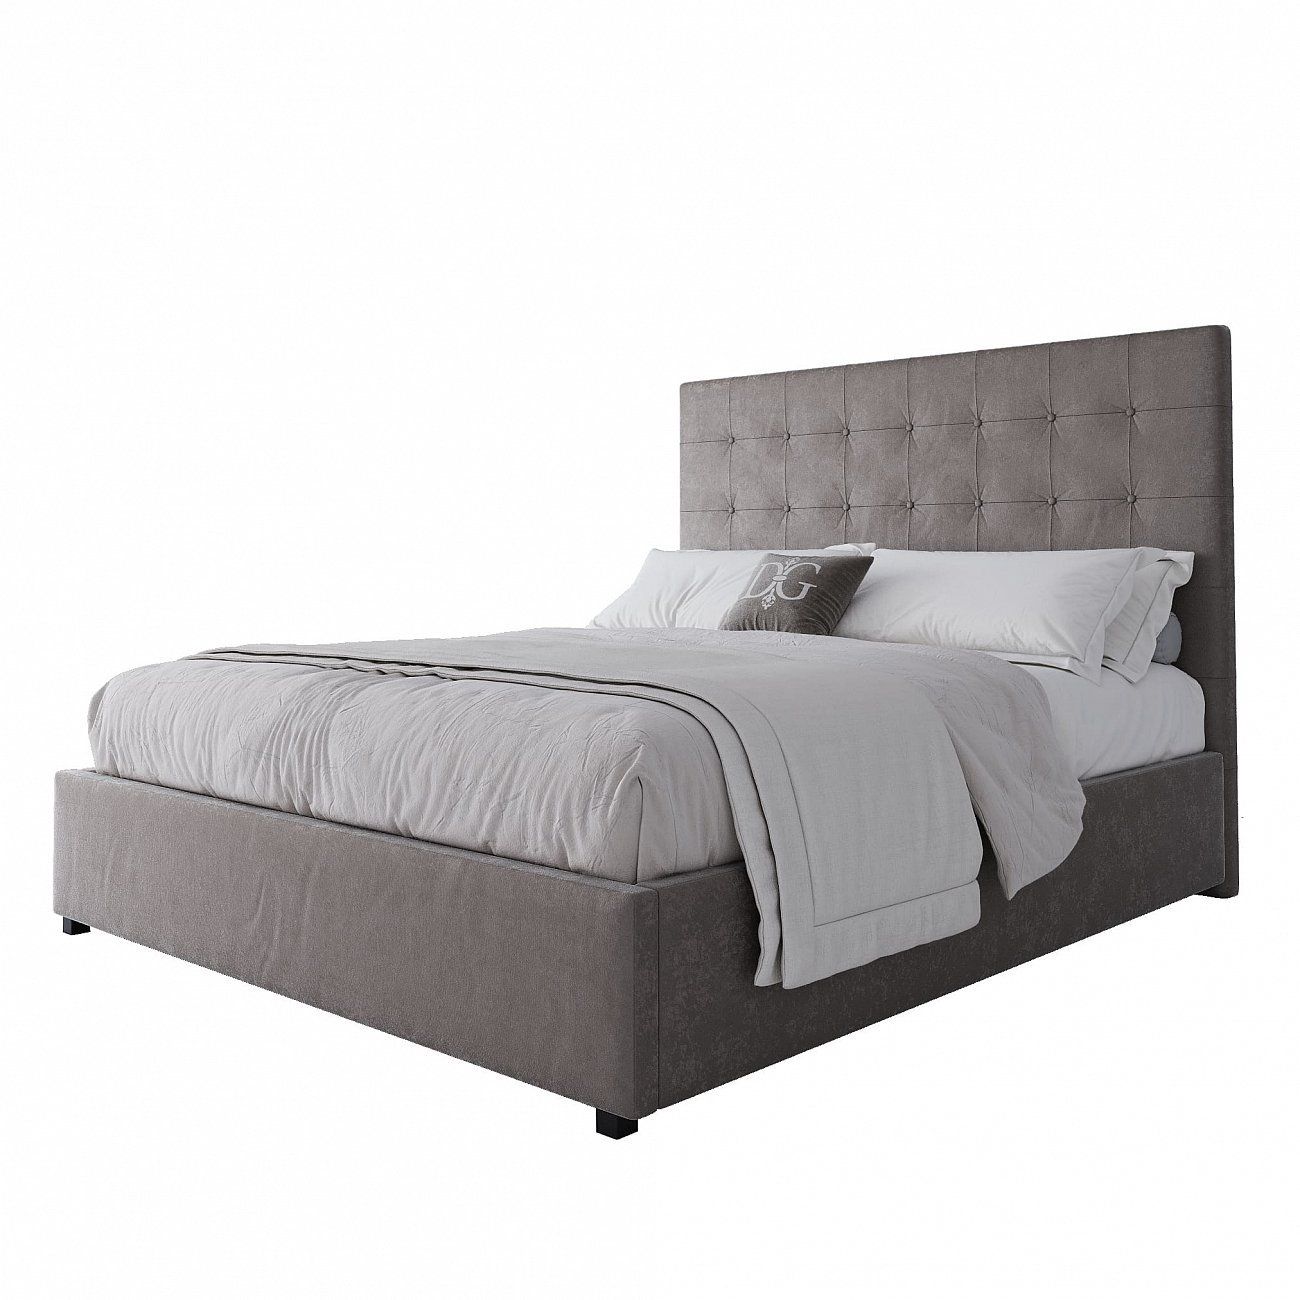 Double bed with upholstered headboard 160x200 cm light brown Royal Black